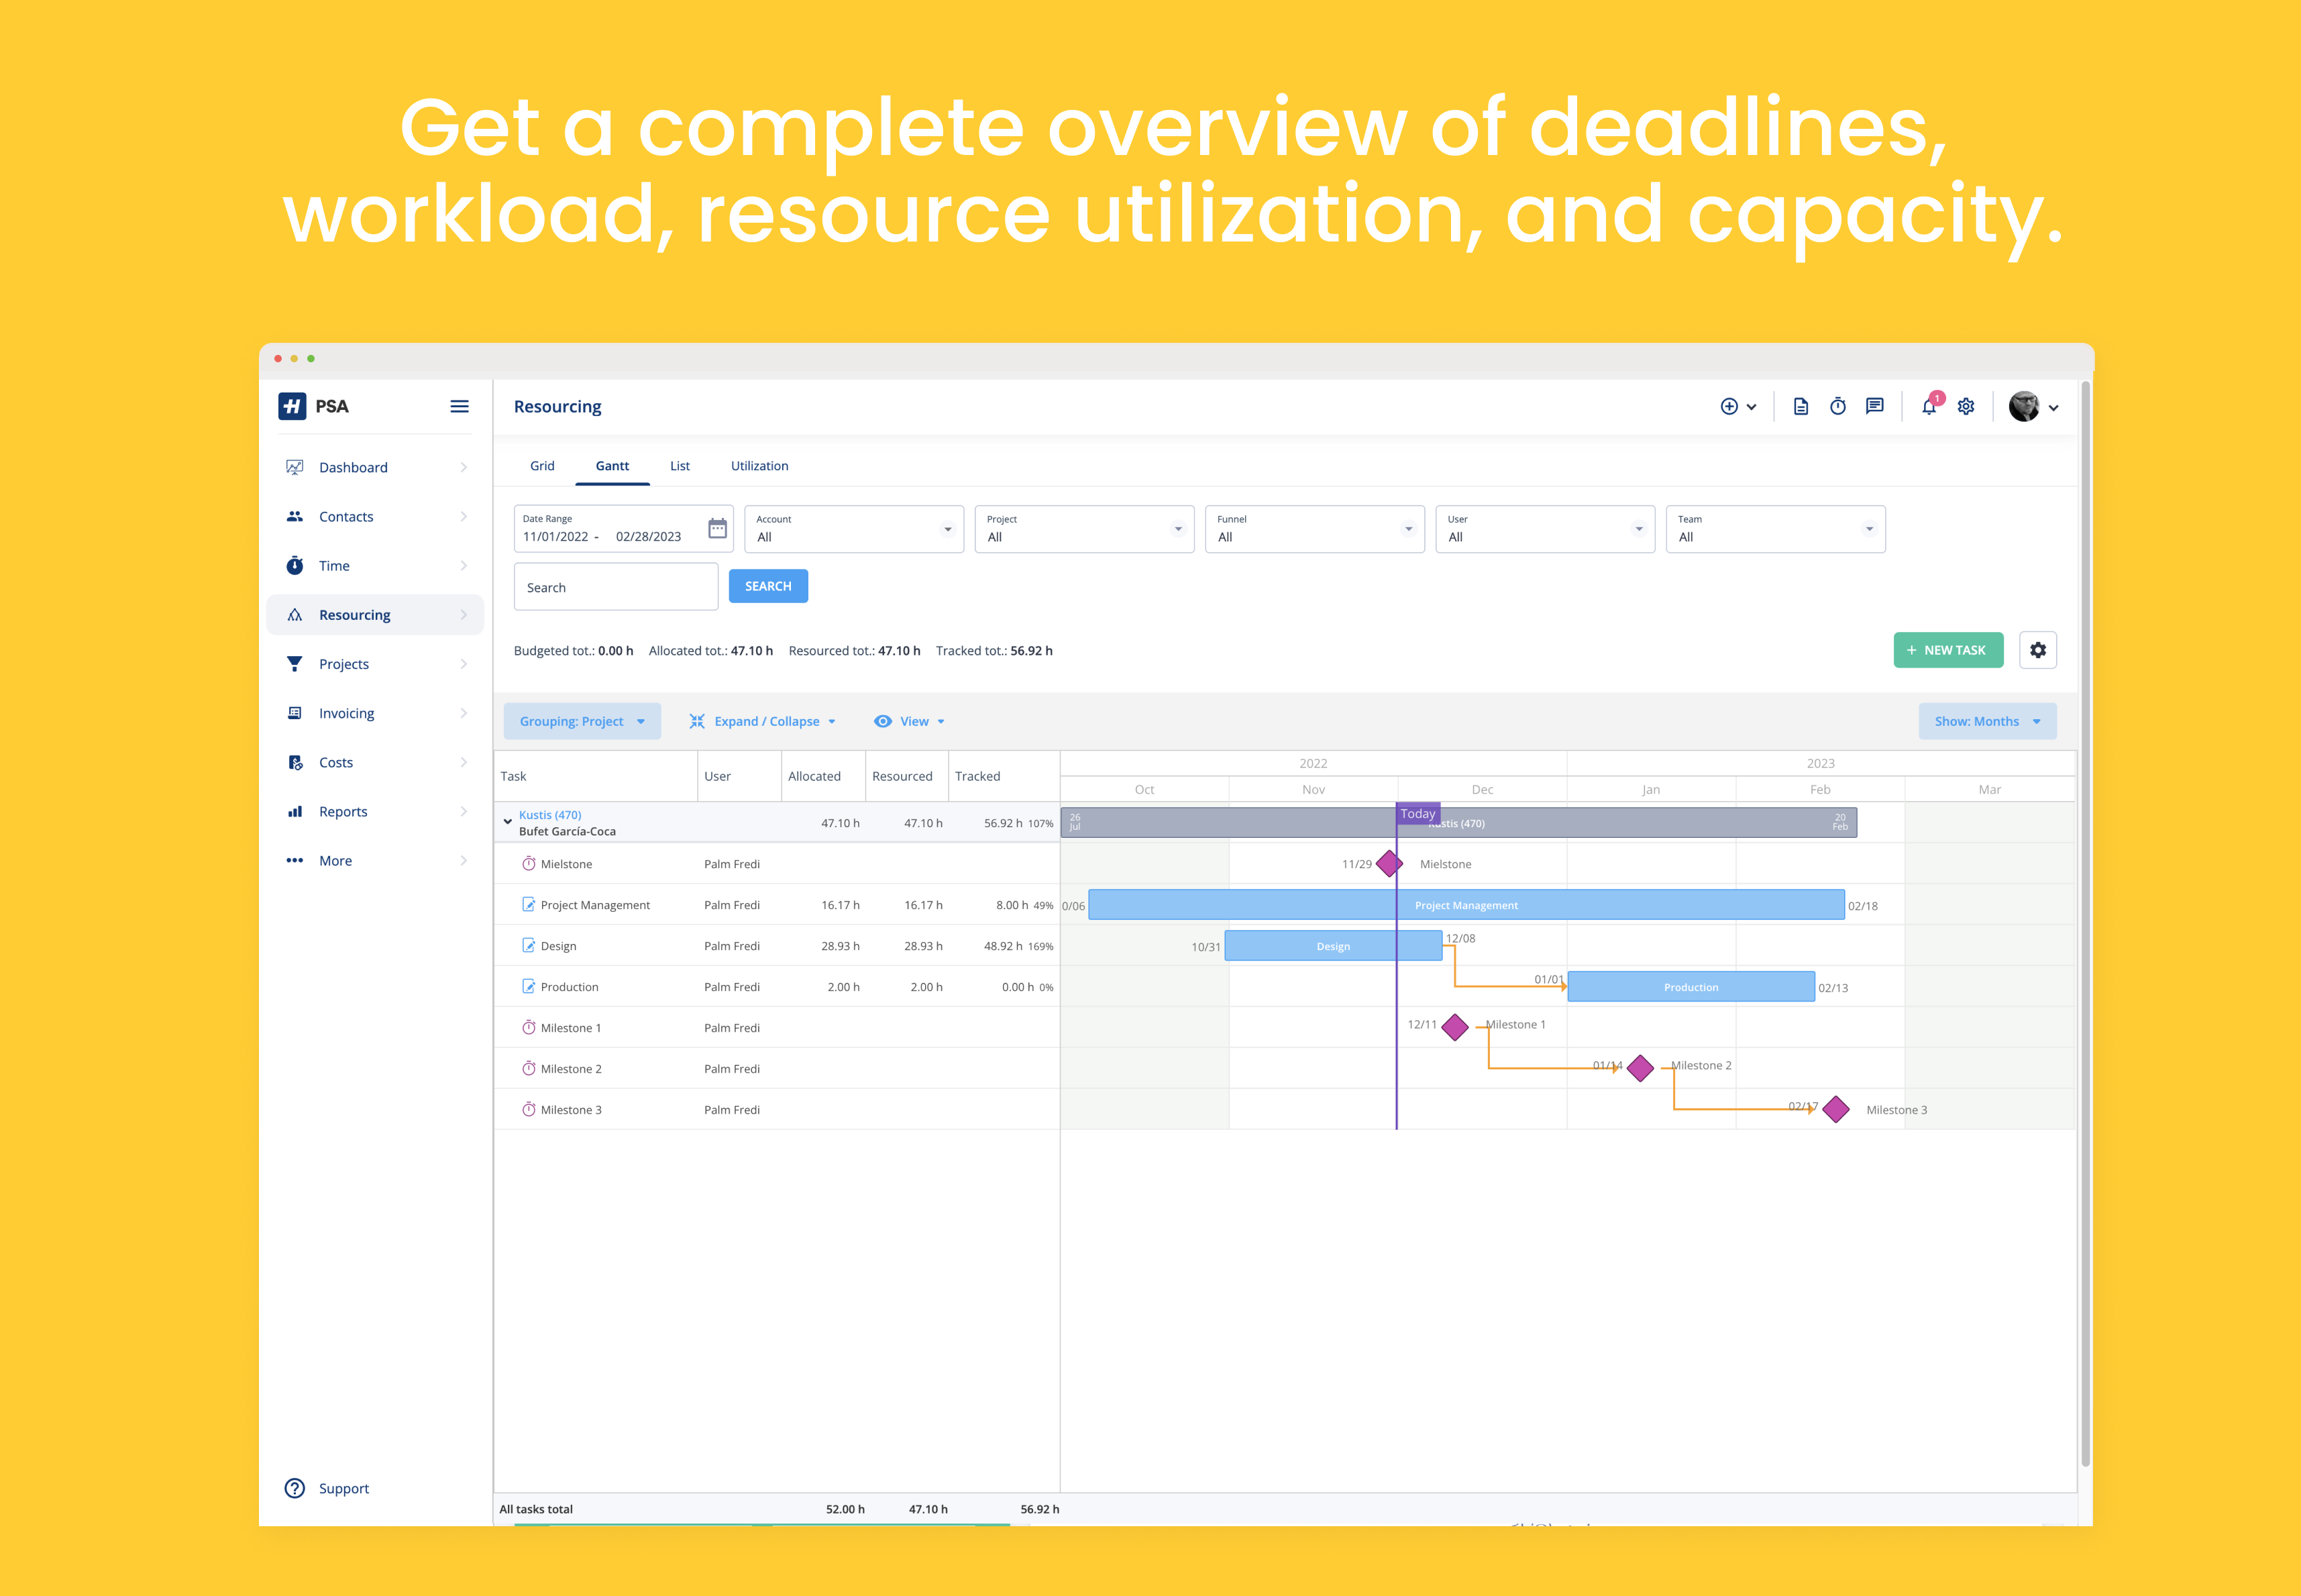 Get a complete overview of deadlines, workload, resource utilization, and capacity.